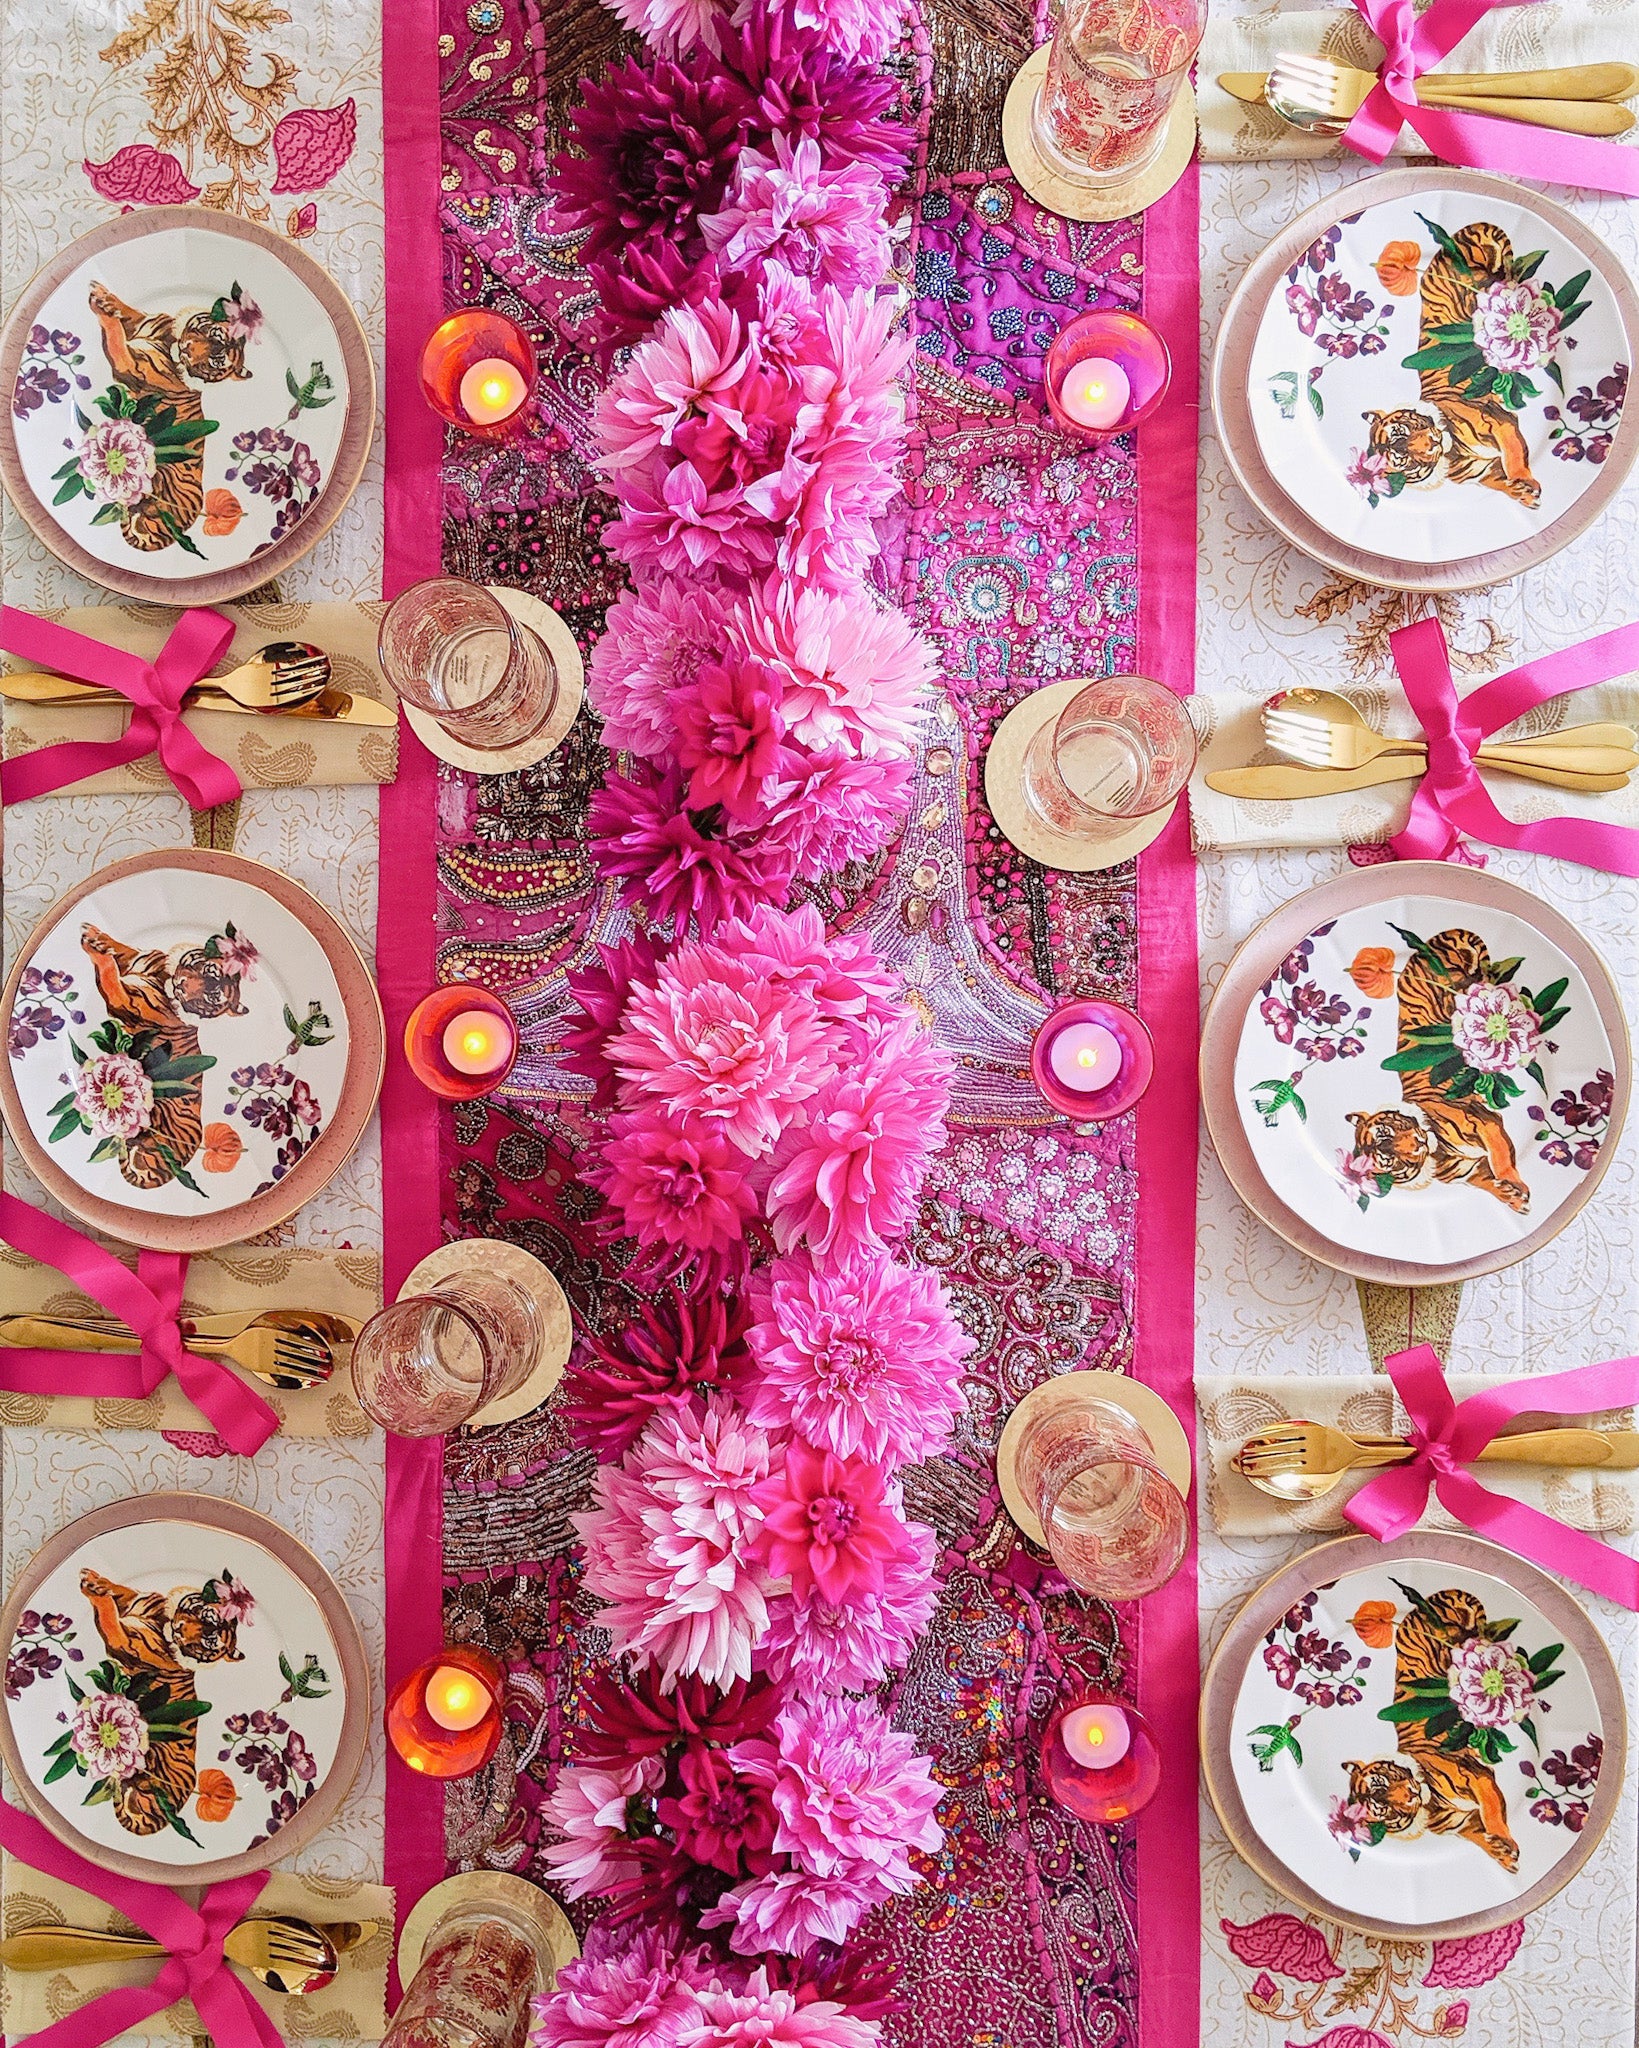 Tablescape by Rosanna Falconer in rani pink with tiger plates